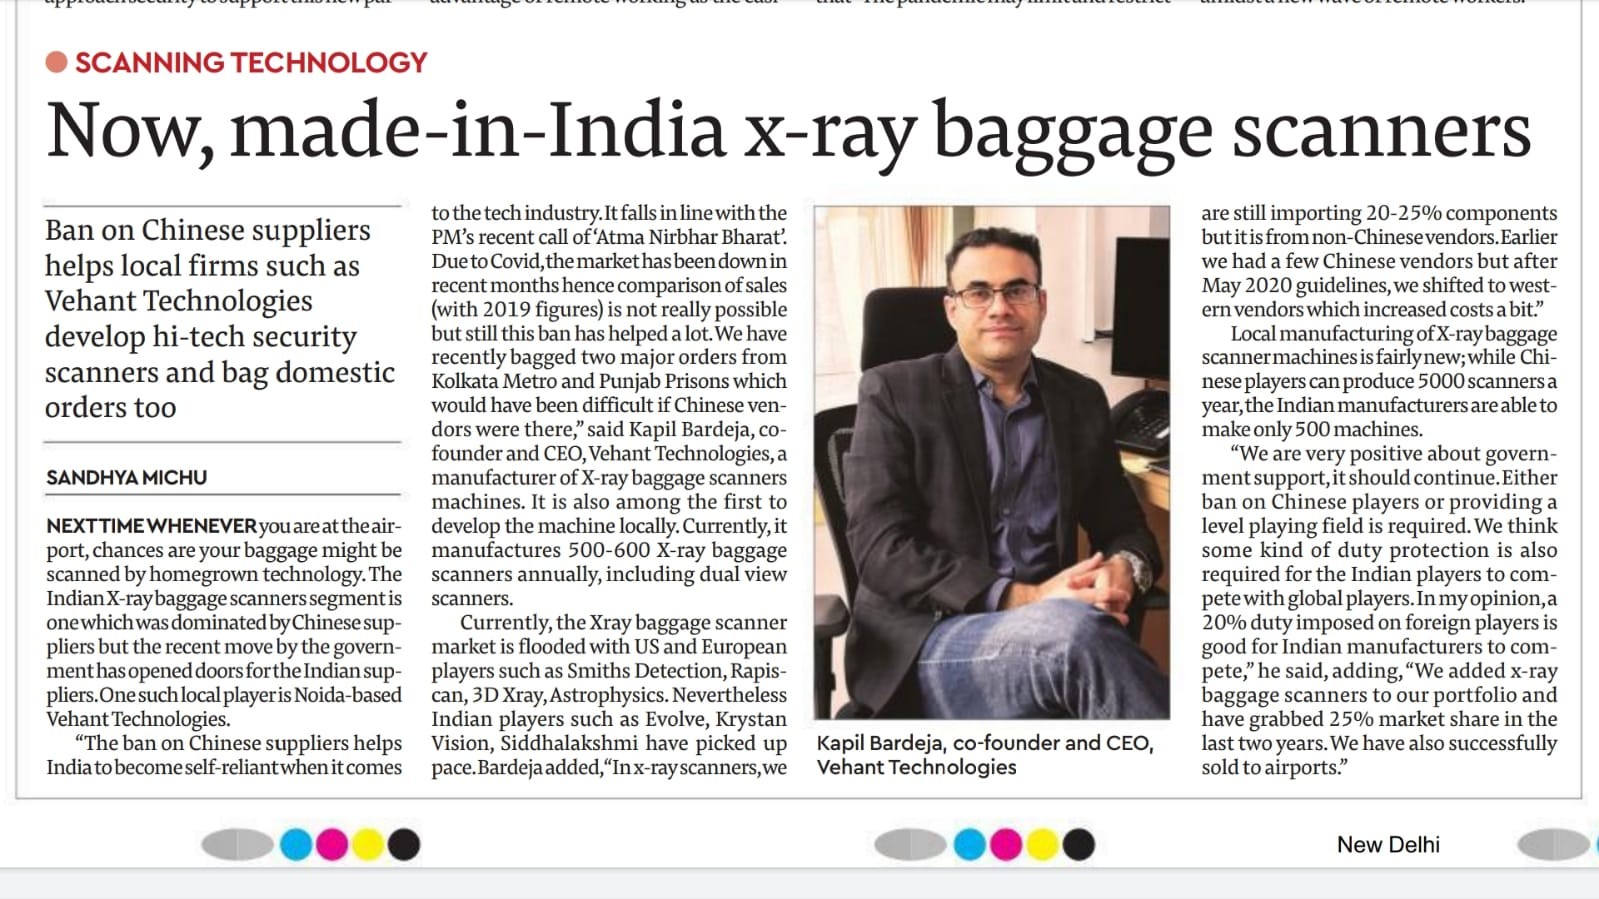 The Financial Express interviews Kapil Bardeja, Co-Founder & CEO, Vehant technologies who speaks about our homegrown technology - Advanced X-Ray baggage scanners. Also, how the ban on Chinese suppliers has helped the domestic firms.